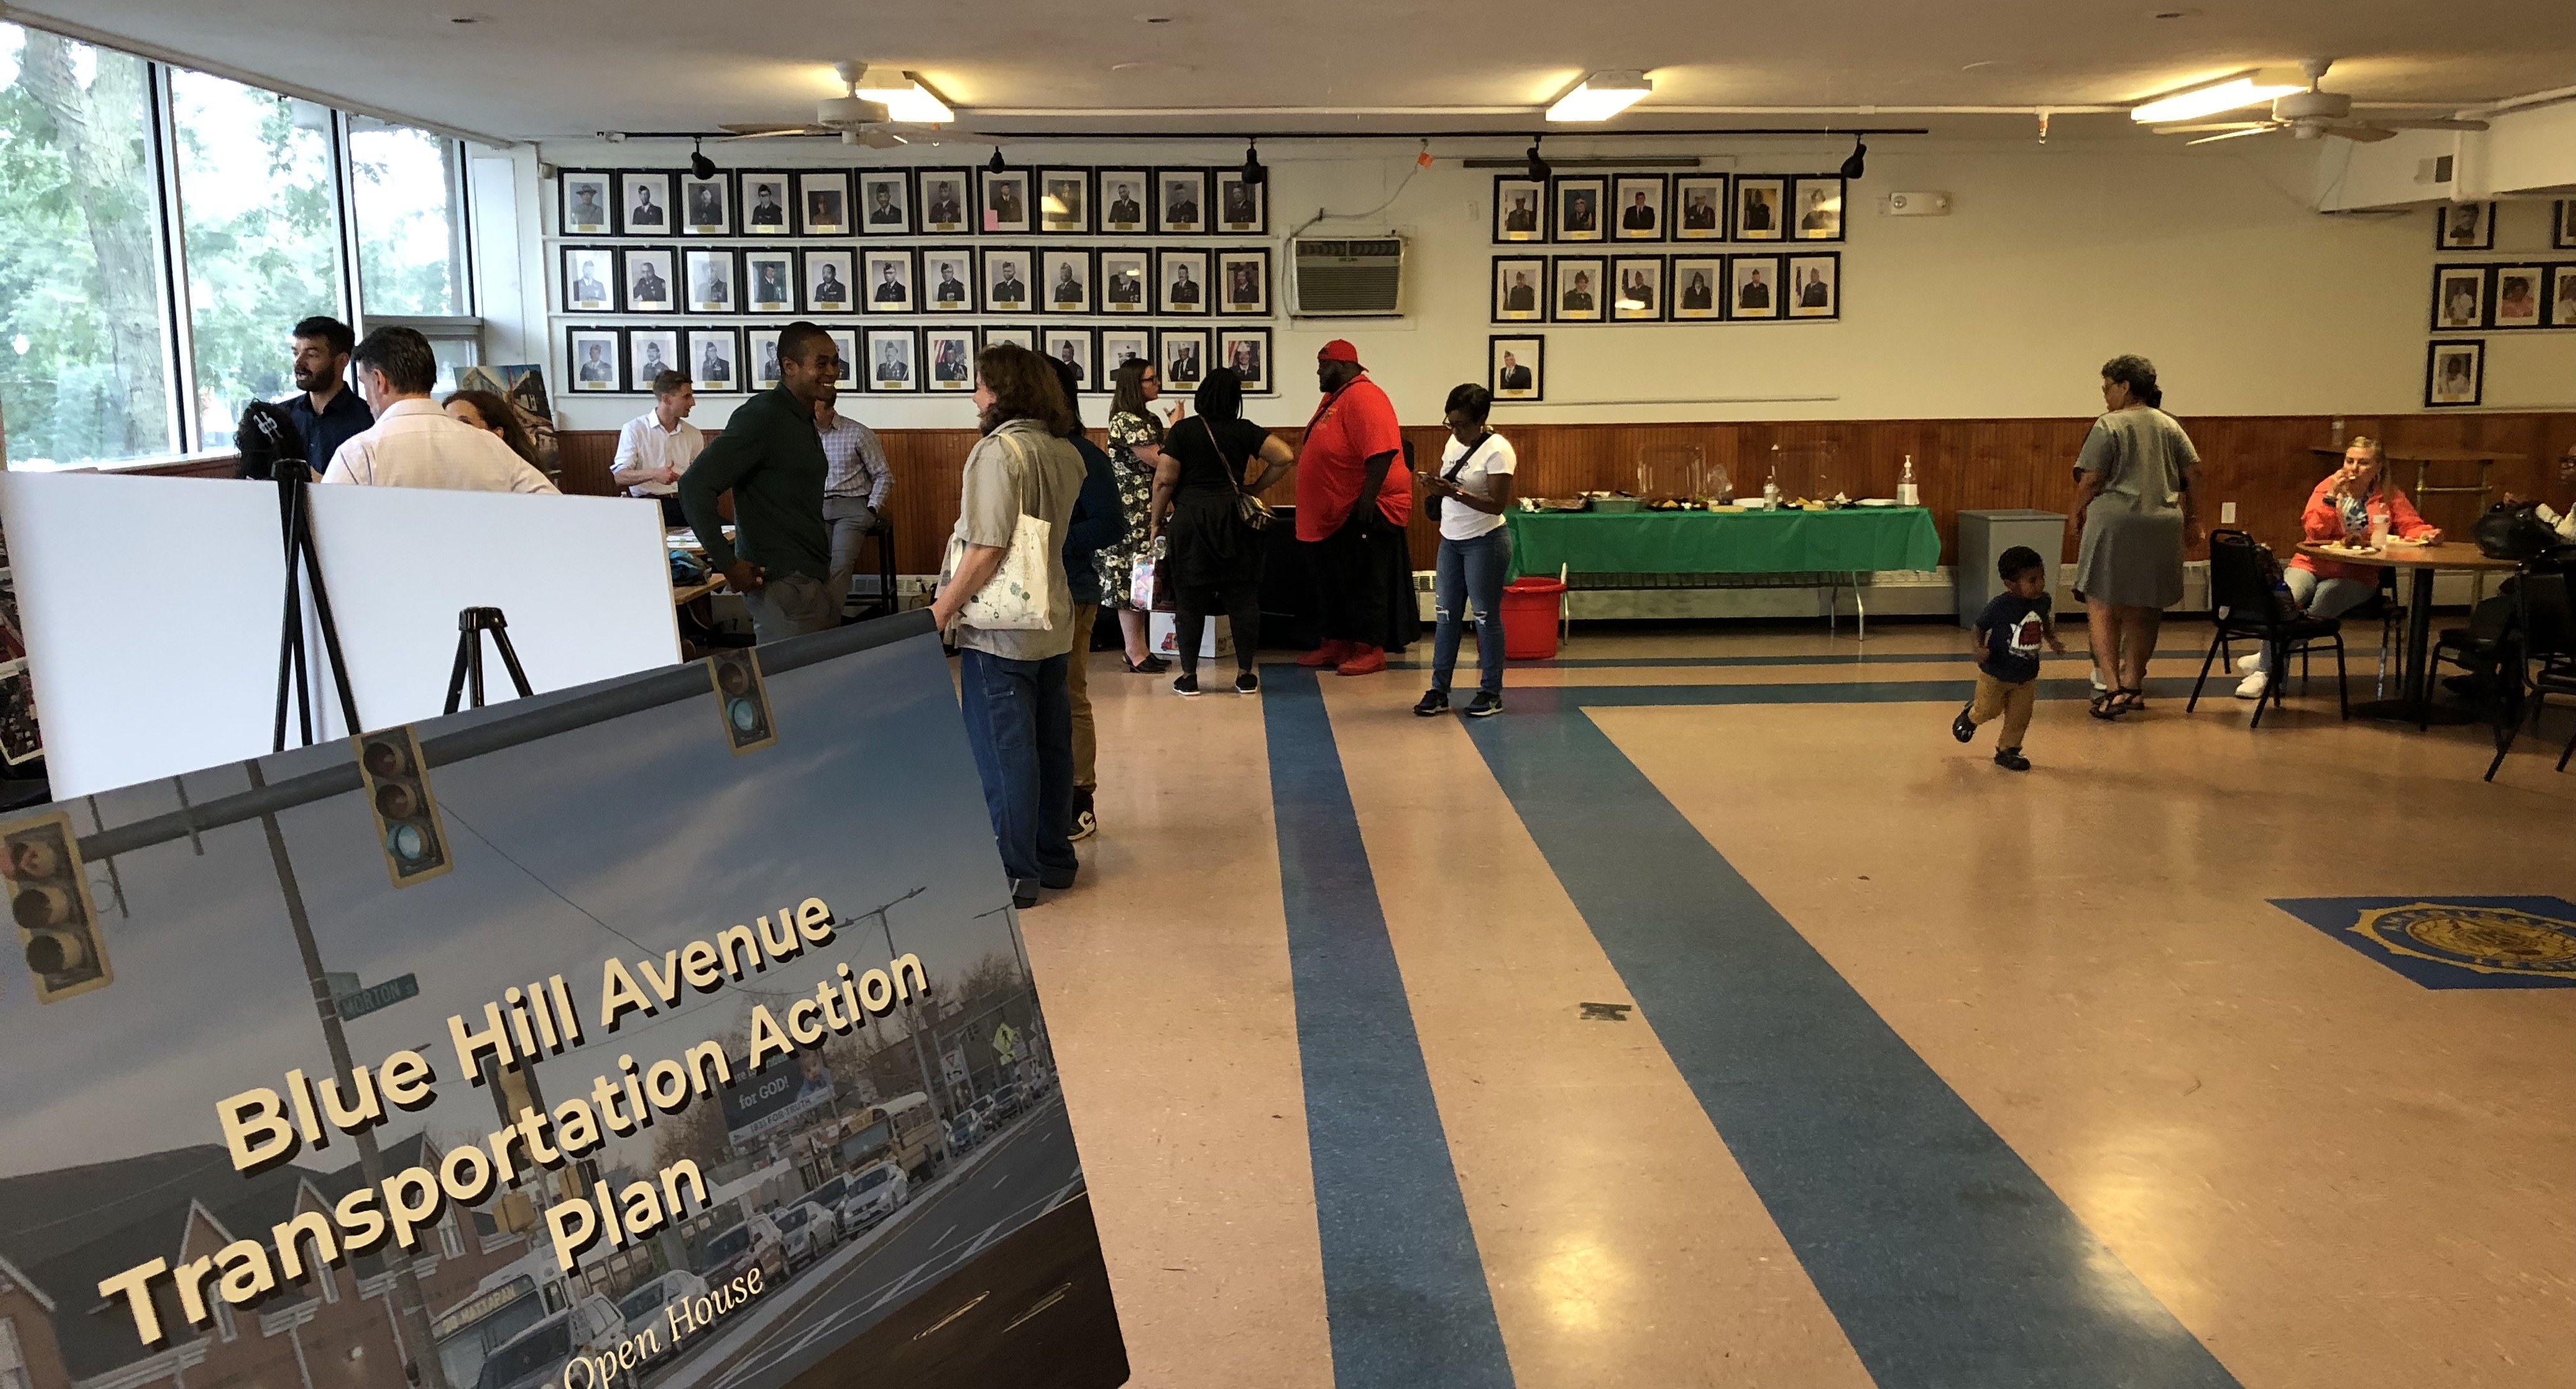 About a dozen people chat in groups in a large function hall. In the foreground at lower left, a poster welcomes attendees with the words "Blue Hill Avenue Transportation Action Plan Open House".